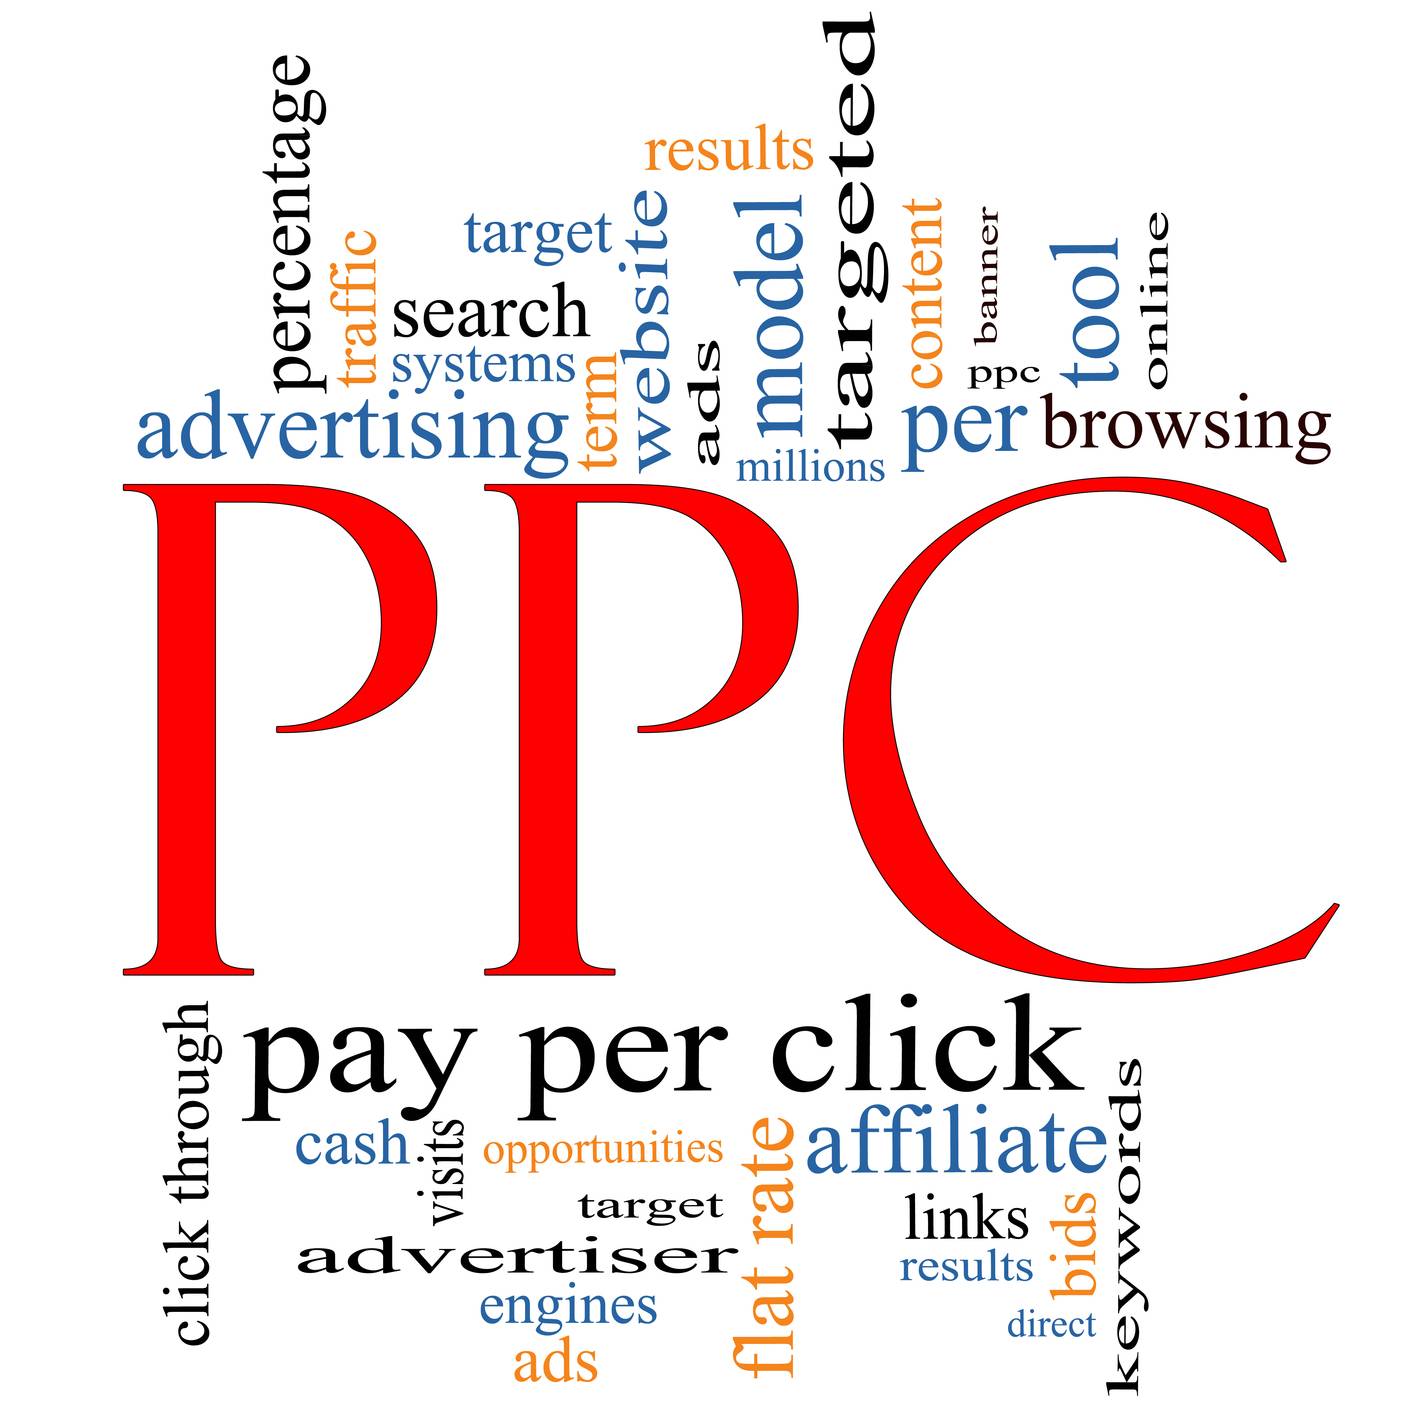 PPC McKinney TX: Make Sure You’re Getting It Done Right